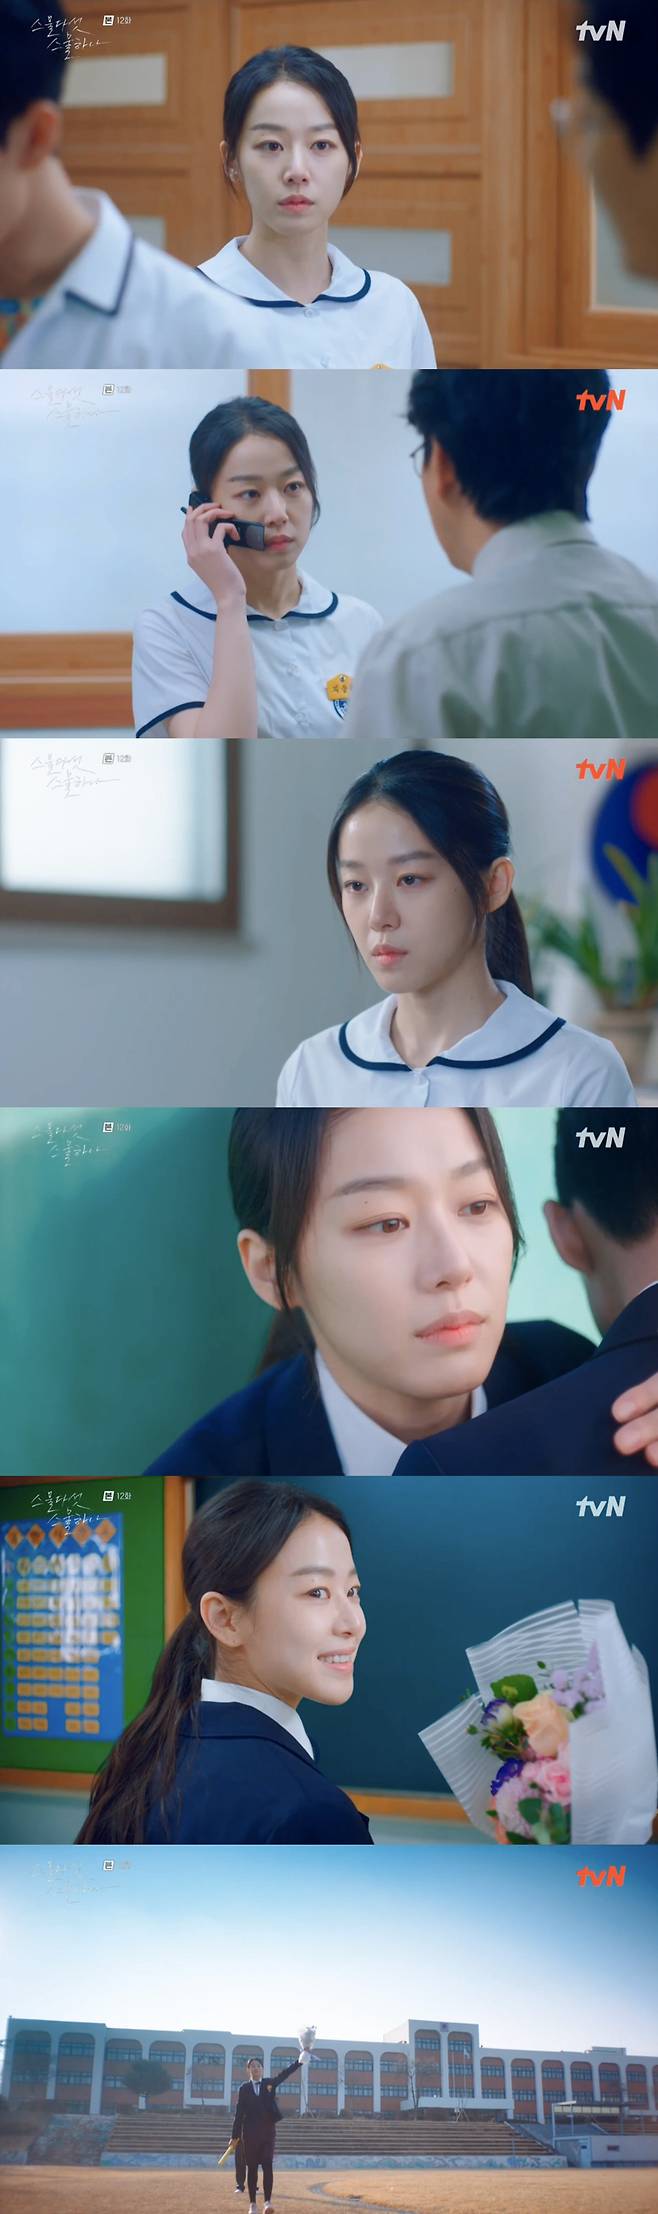 Lee Joo-myung, who was in the 12th episode of TVNs Saturday Drama Twenty Five Twinty Hana (played by Kwon Do-eun, directed by Jung Ji-hyun Kim Seung-ho), played a teenager who was angry with corporal punishment.Lee Joo-myung, who was usually dissatisfied with corporal punishment on campus, said, When Friend Ji-woong (Choi Hyun-wook) was assaulted by the students principal, he said, Why do you have your hands first every time you can speak?He was banned from corporal punishment on campus. Dont you know? and reported him to the police station.But Seung-wan was once again angry that there was nothing that changed even when the police came.Since then, Seung-wan has publicly accused the reality through his pirate broadcasts, and has been forced to write Choices whether he will be disciplined or publicly write a reflection.After thinking that he had done nothing wrong, he decided to leave the school himself and put it into practice.Lee Joo-myung, who burst into a suppressed anger, expressed the supremacy of the subjective aspect of taking the way to break without bending, raising the tension with a cold and decisive eye.He added a sense of clutter to the end of the Friends hot outing, leaving the playground with a cool style.Lee Joo-myung, who delicately expressed complex emotions such as coolness, resiliency and regret, was enough to make a deep impression.In particular, Lee Joo-myung has been drawing the first and second class of the school and the smart class leader in a straight and straight manner, and he has put weight on the fact that the anger and withdrawal of the class are not immature Choices.He played a role in raising awareness that corporal punishment is bad, no matter how much it is for the system.Lee Joo-myung, who has proved his brilliant presence as he continues to play from a youthful and youthful appearance to a character full of justice.Expectations are high that Seung-wan, who appeared in perms for the first time after dropping out, will shine a youthful youth every day with another step.